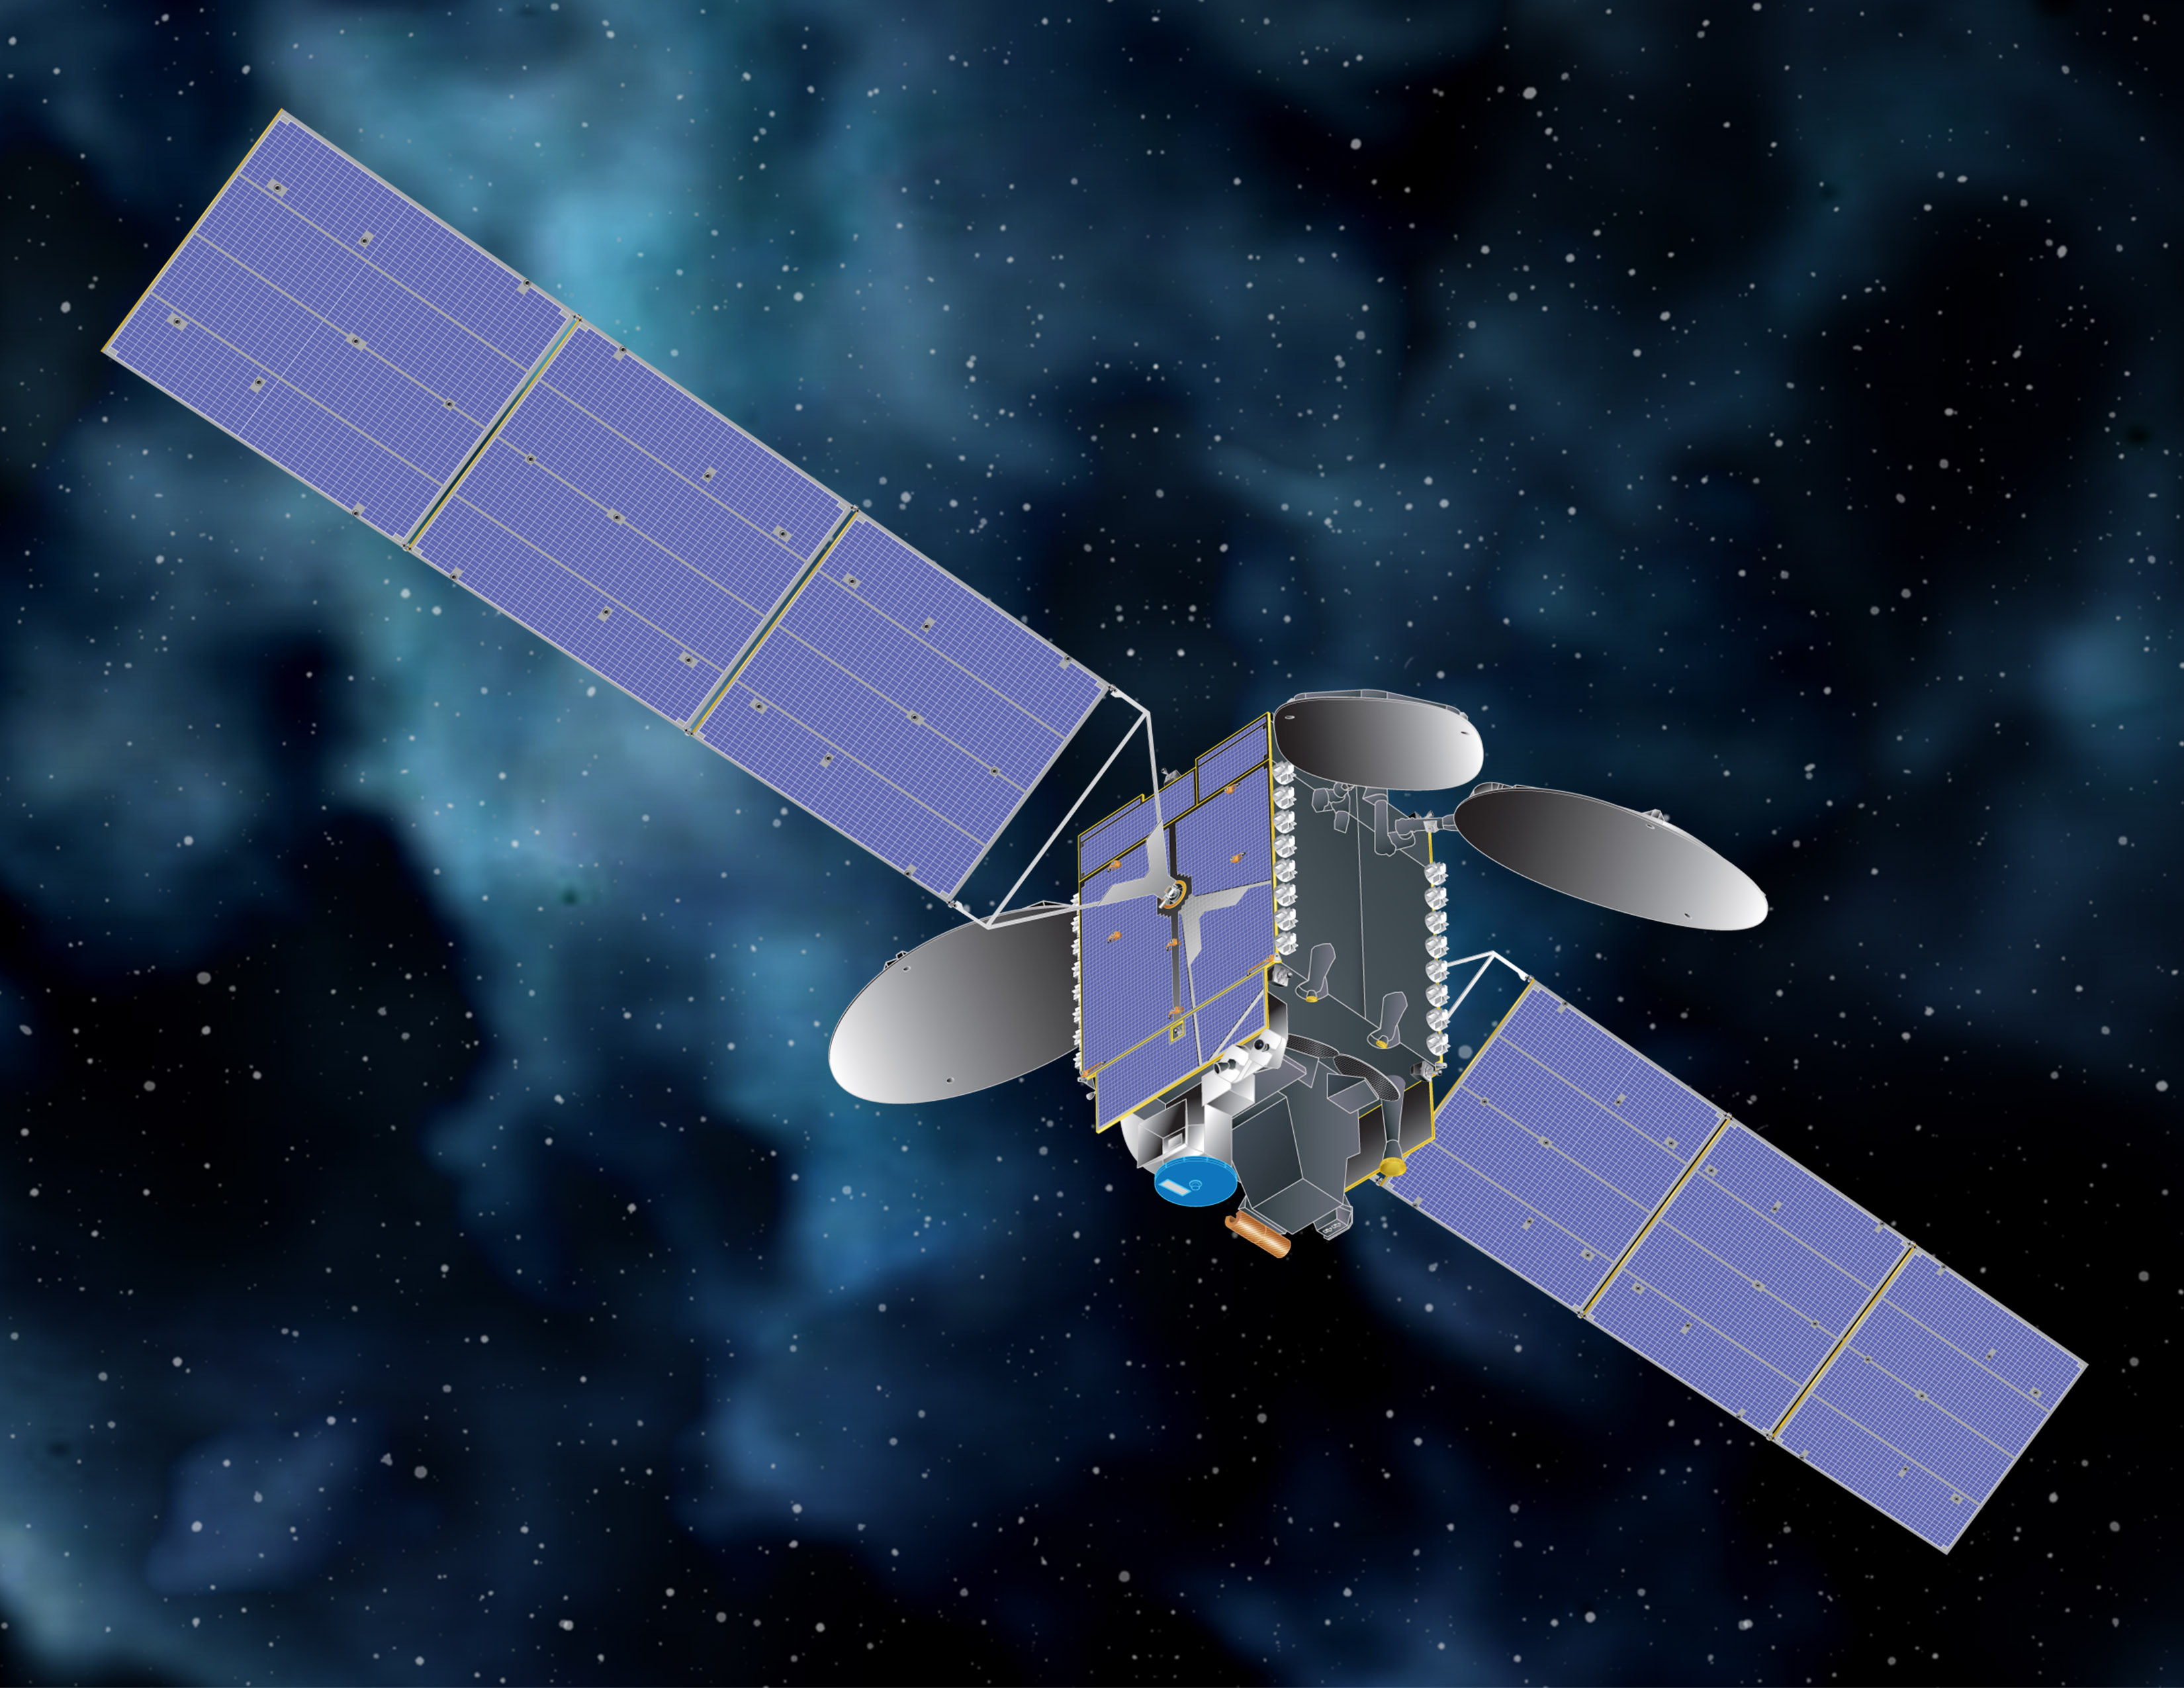 SSL concept of GEO satellite with NASA hosted payload